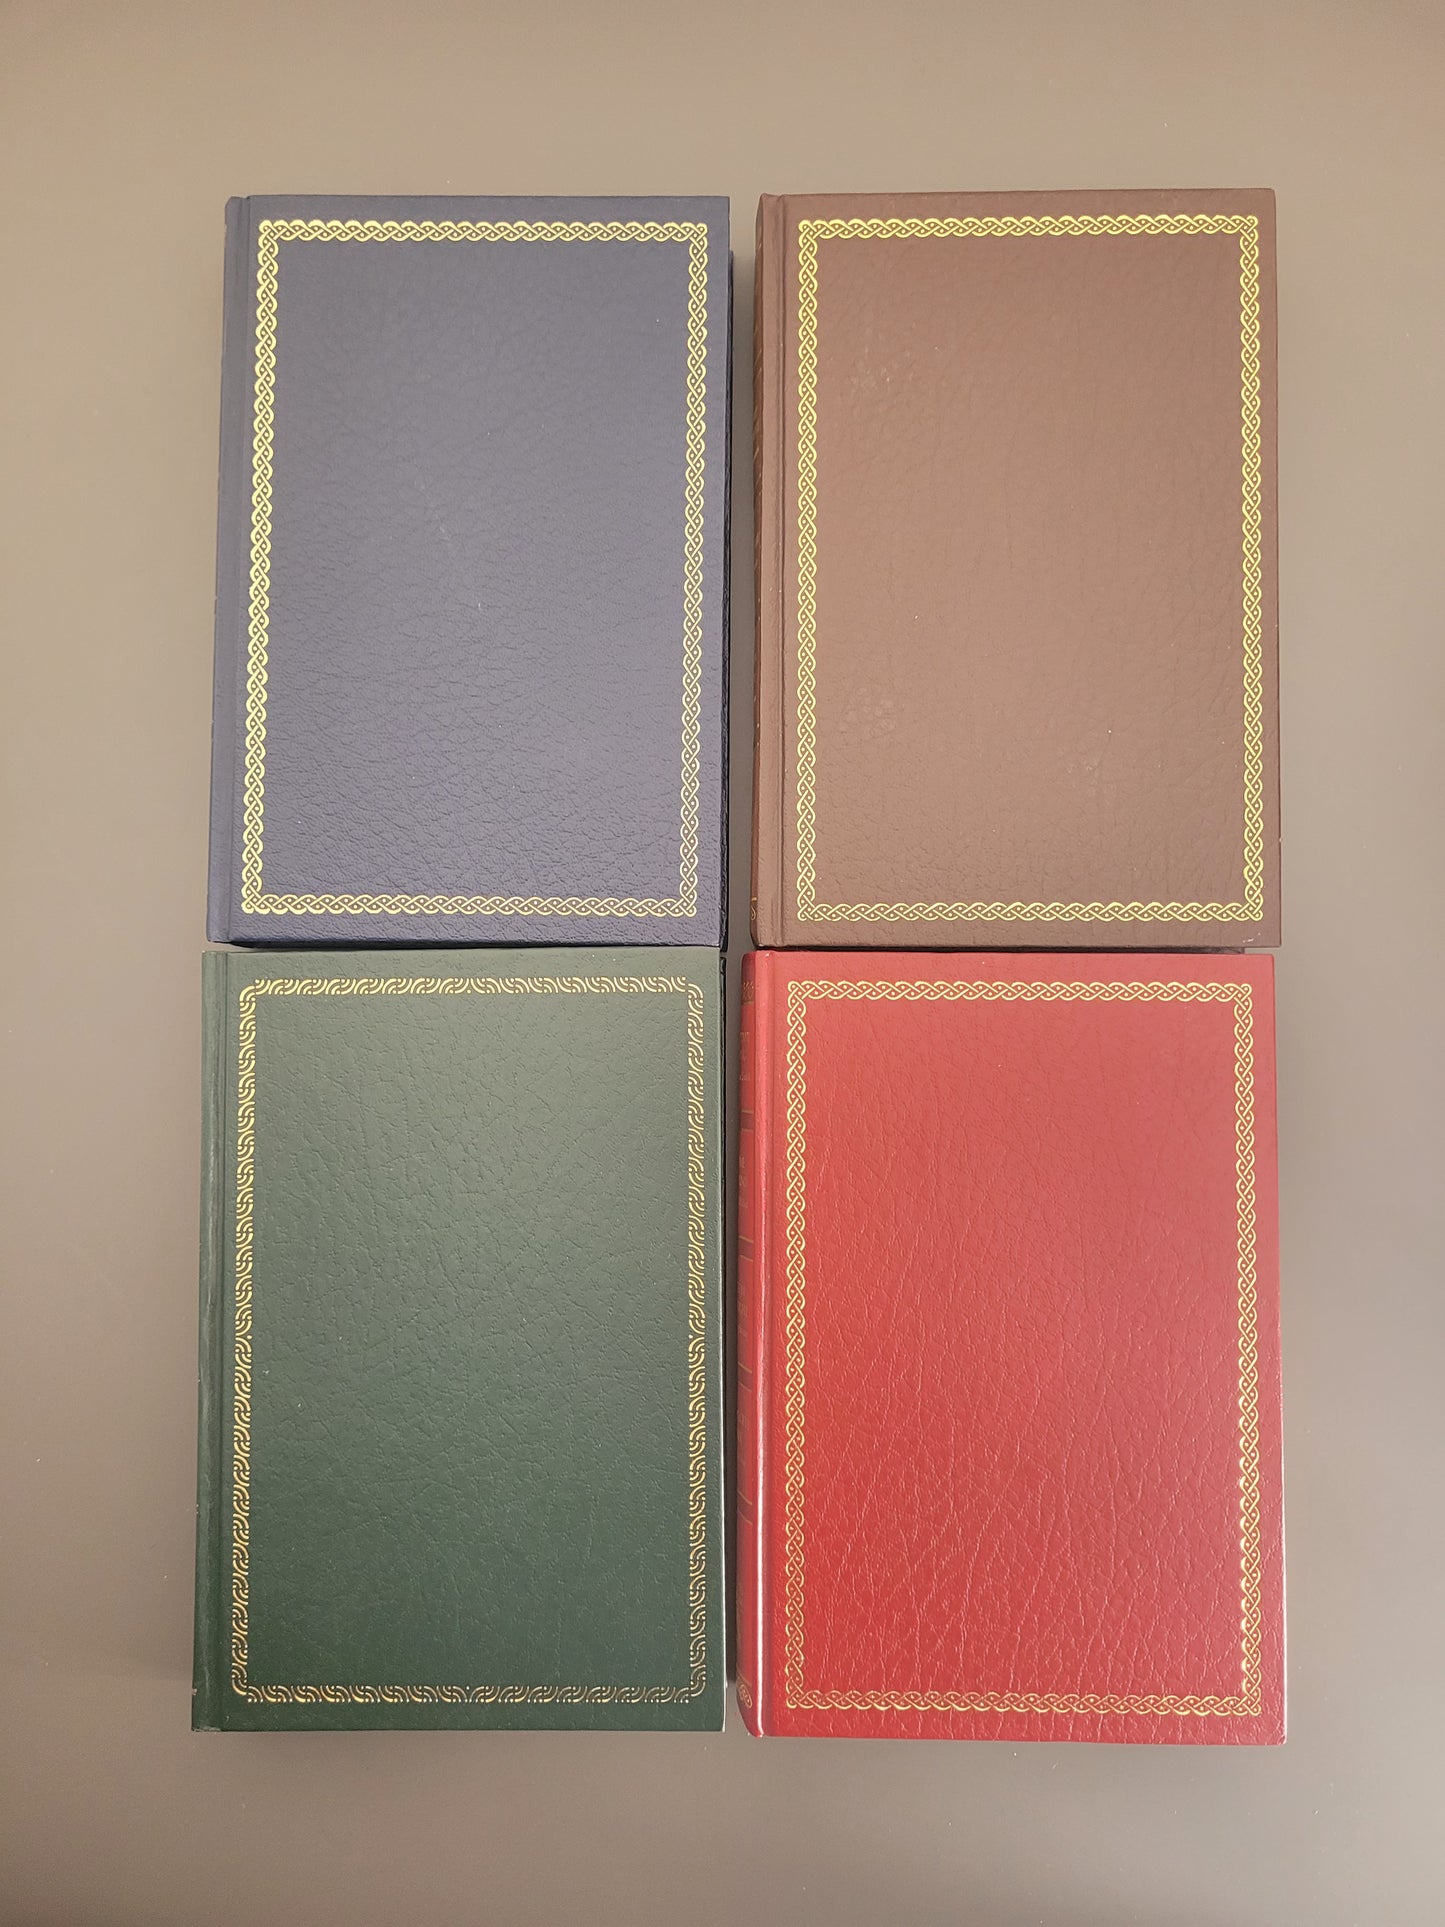 A picture of 4 hardback books - one blue, one brown, one green and one red.